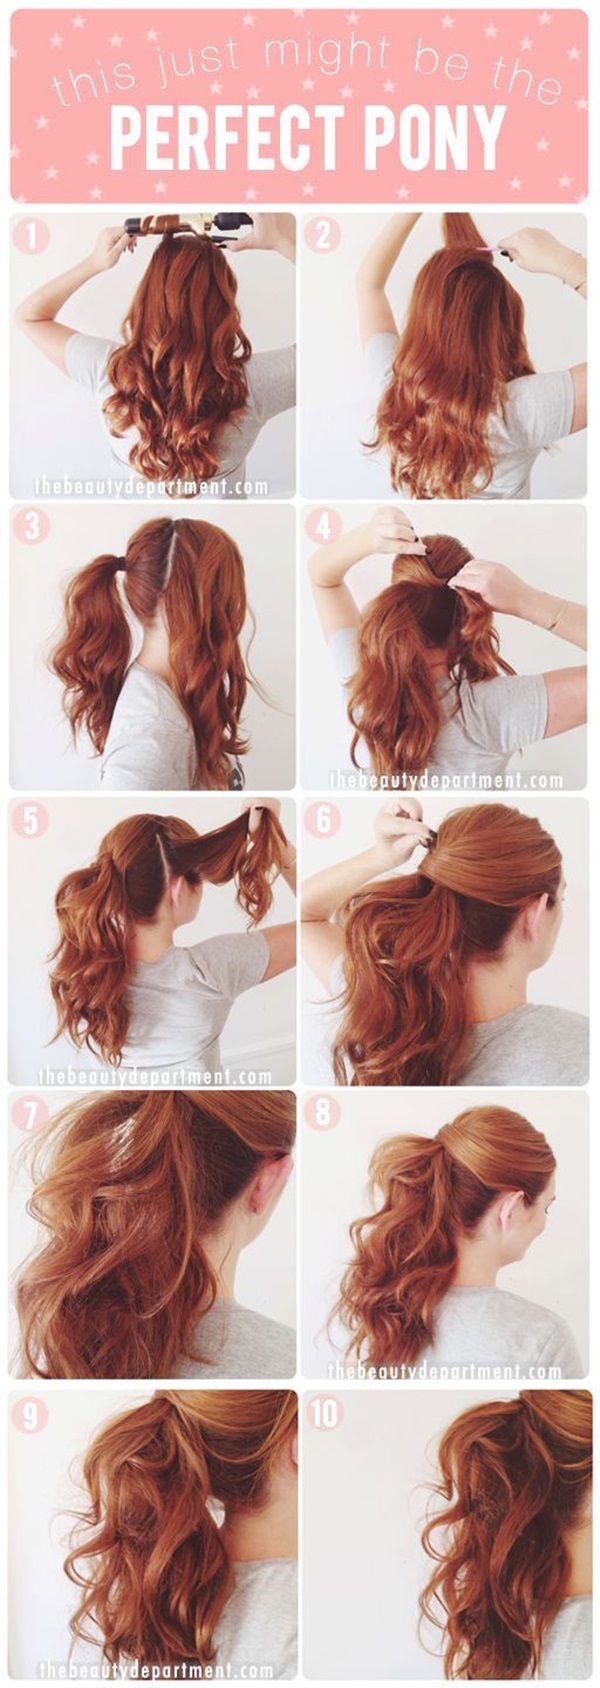 Simple Five Minute Hairstyles (11)